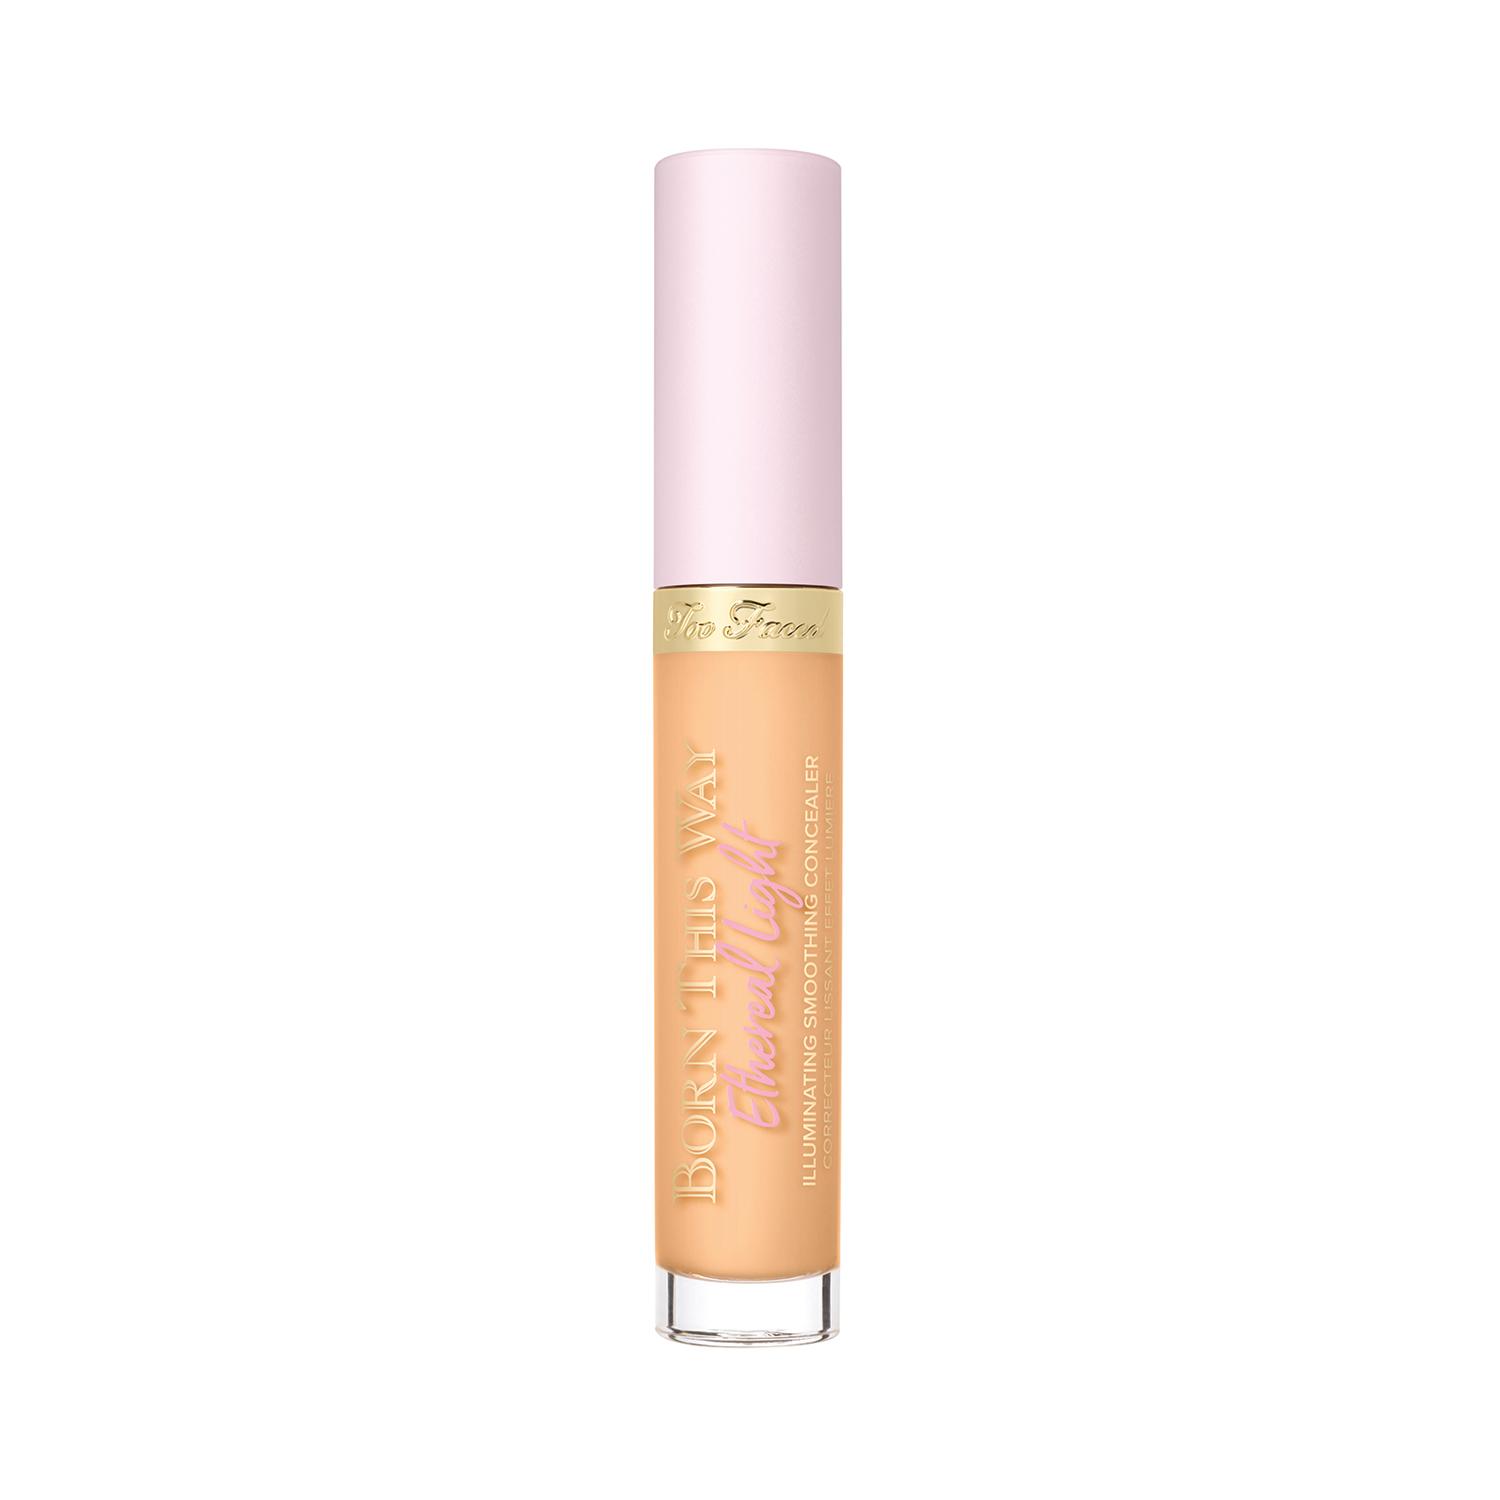 Too Faced | Too Faced Born This Way Illuminating Concealer - Biscotti (5ml)